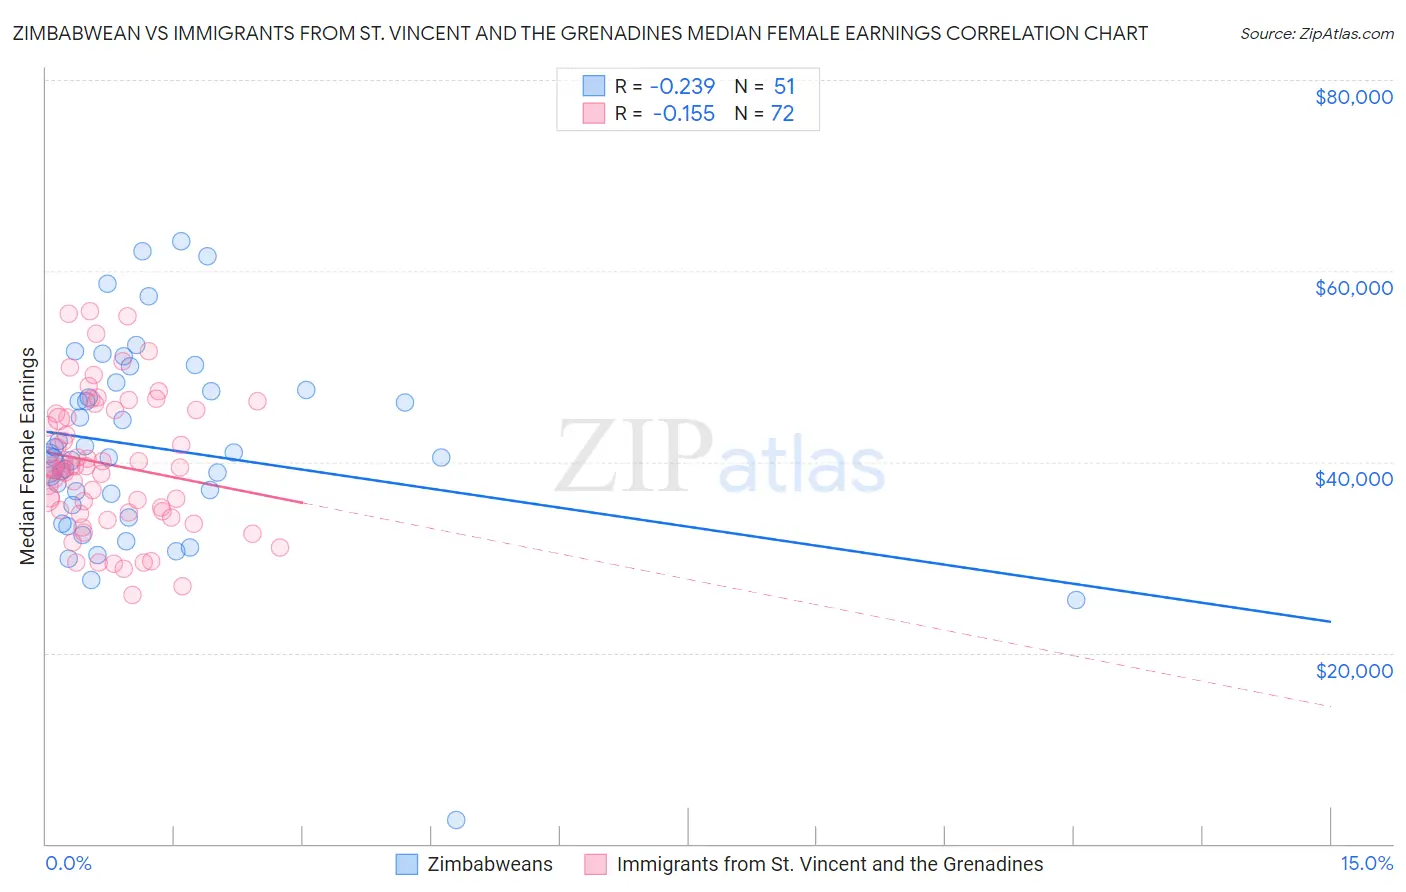 Zimbabwean vs Immigrants from St. Vincent and the Grenadines Median Female Earnings